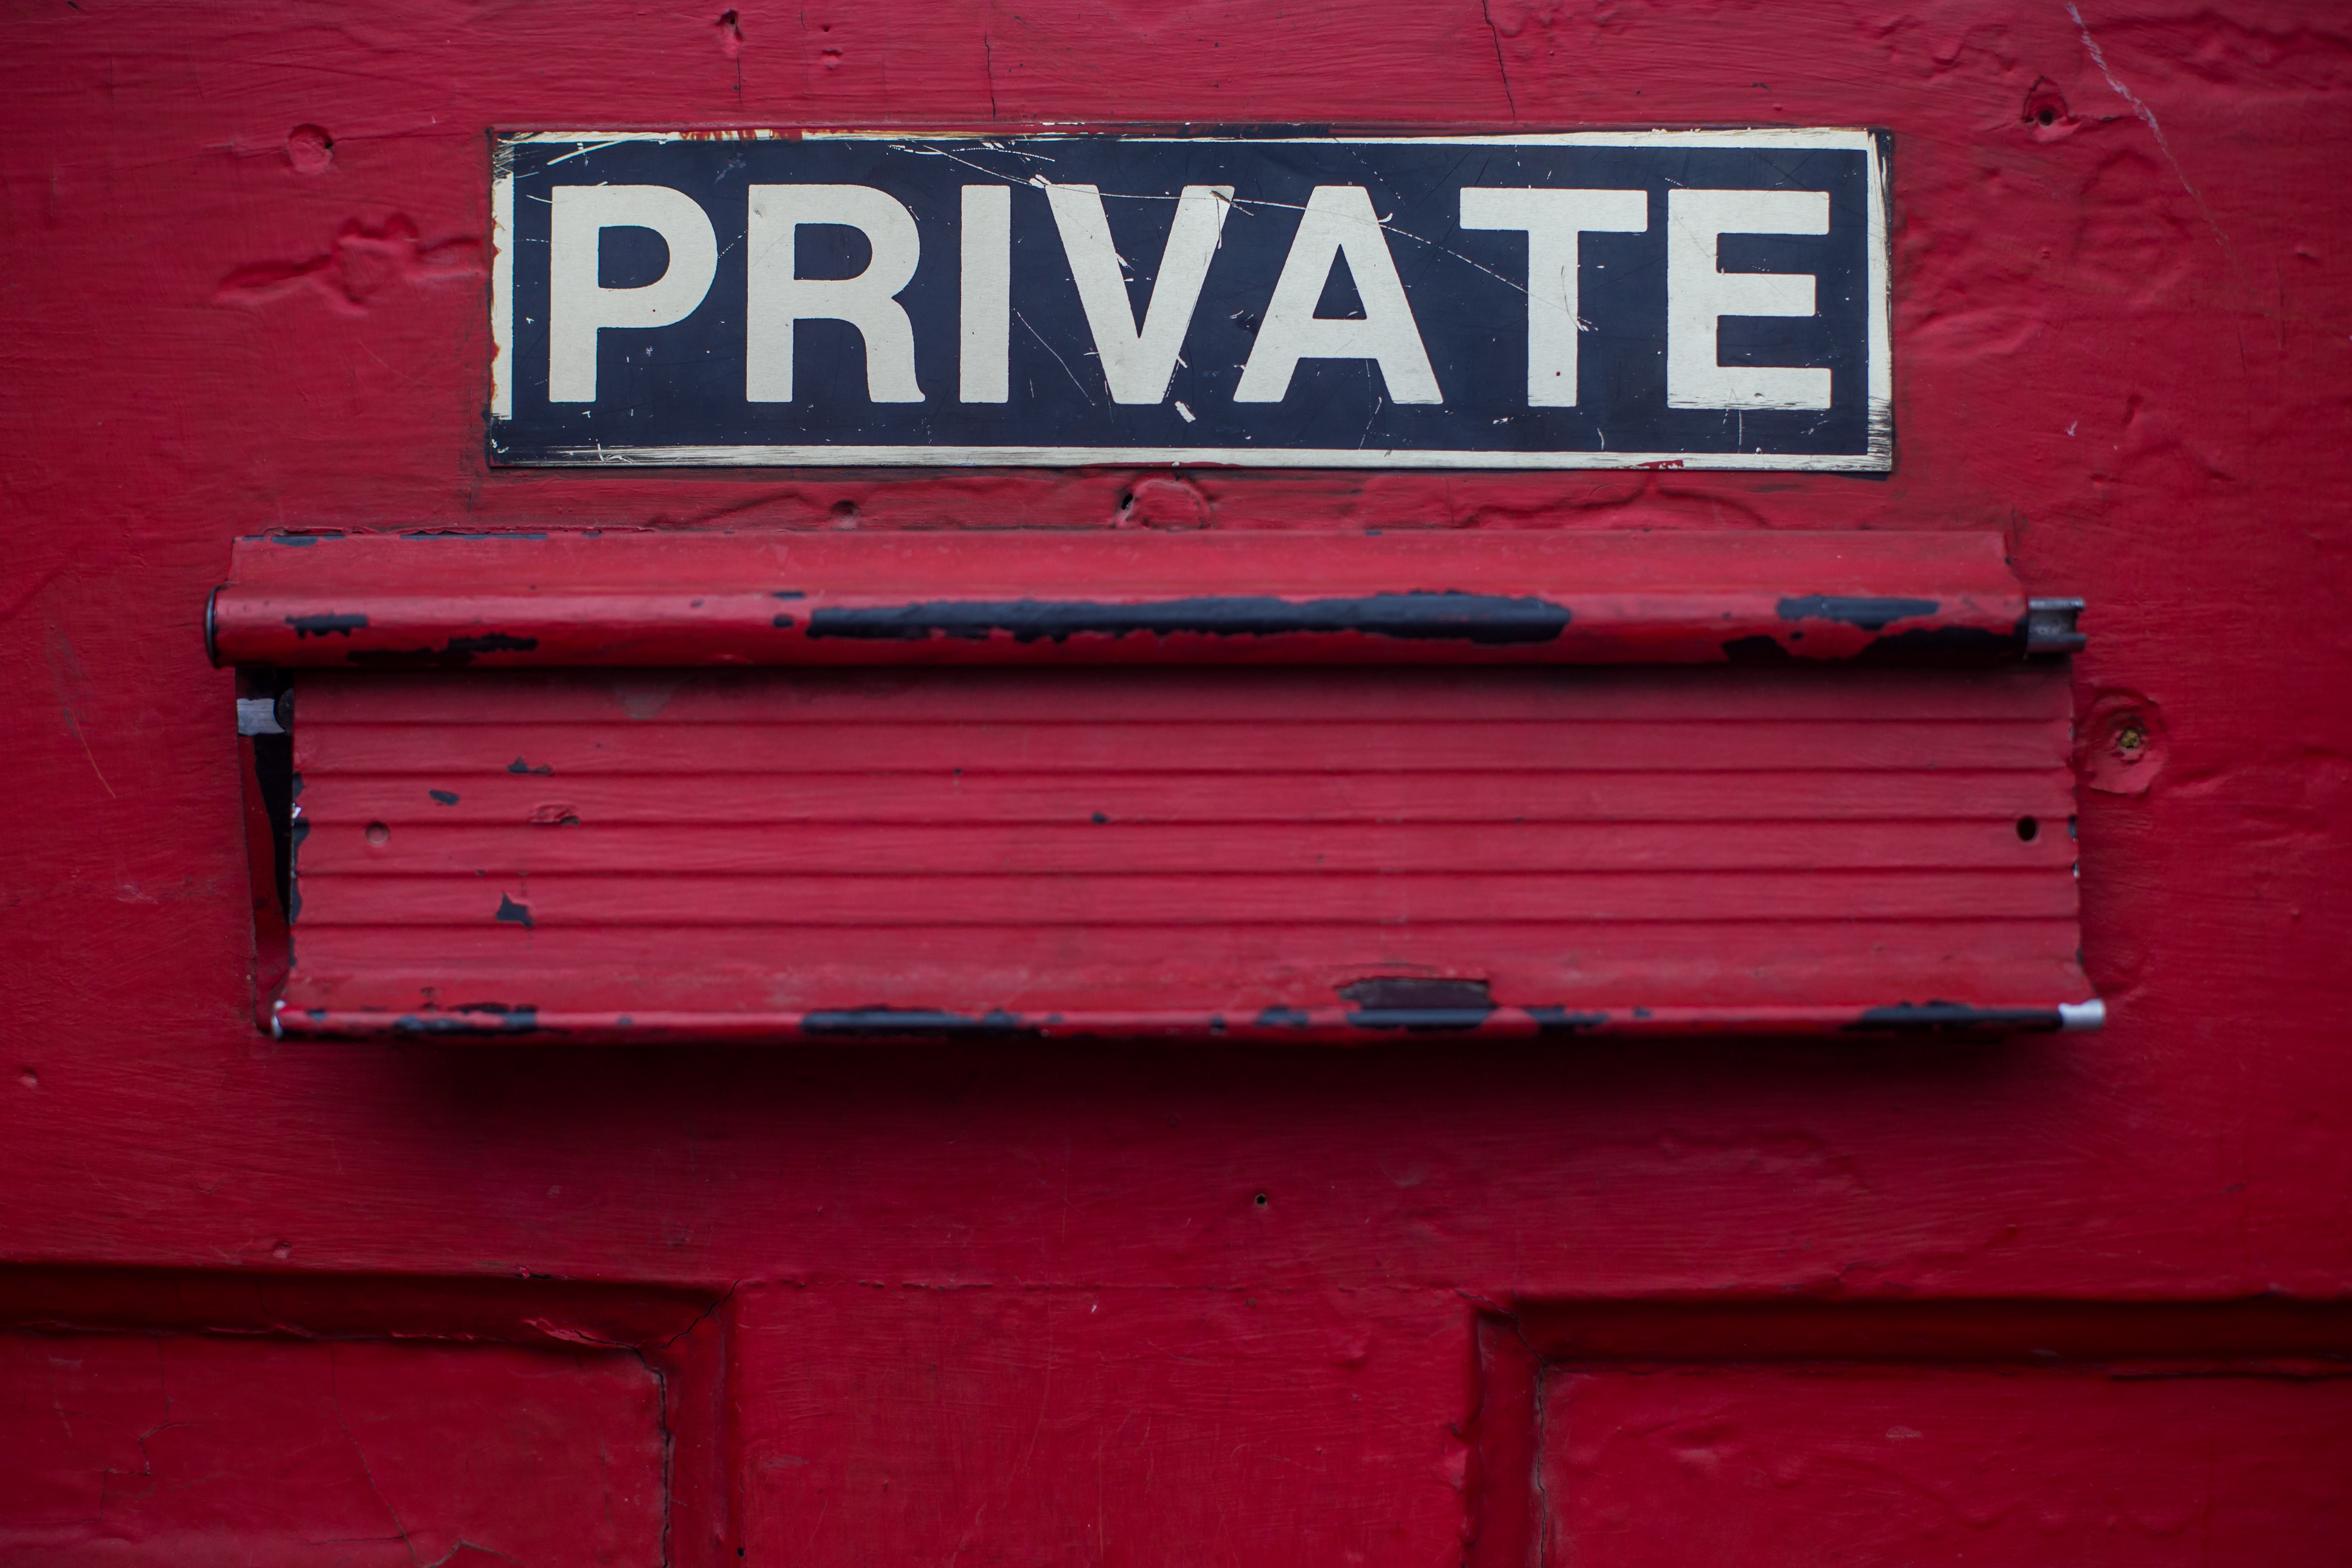 Image shows the word Private written above a letterbox of a red door